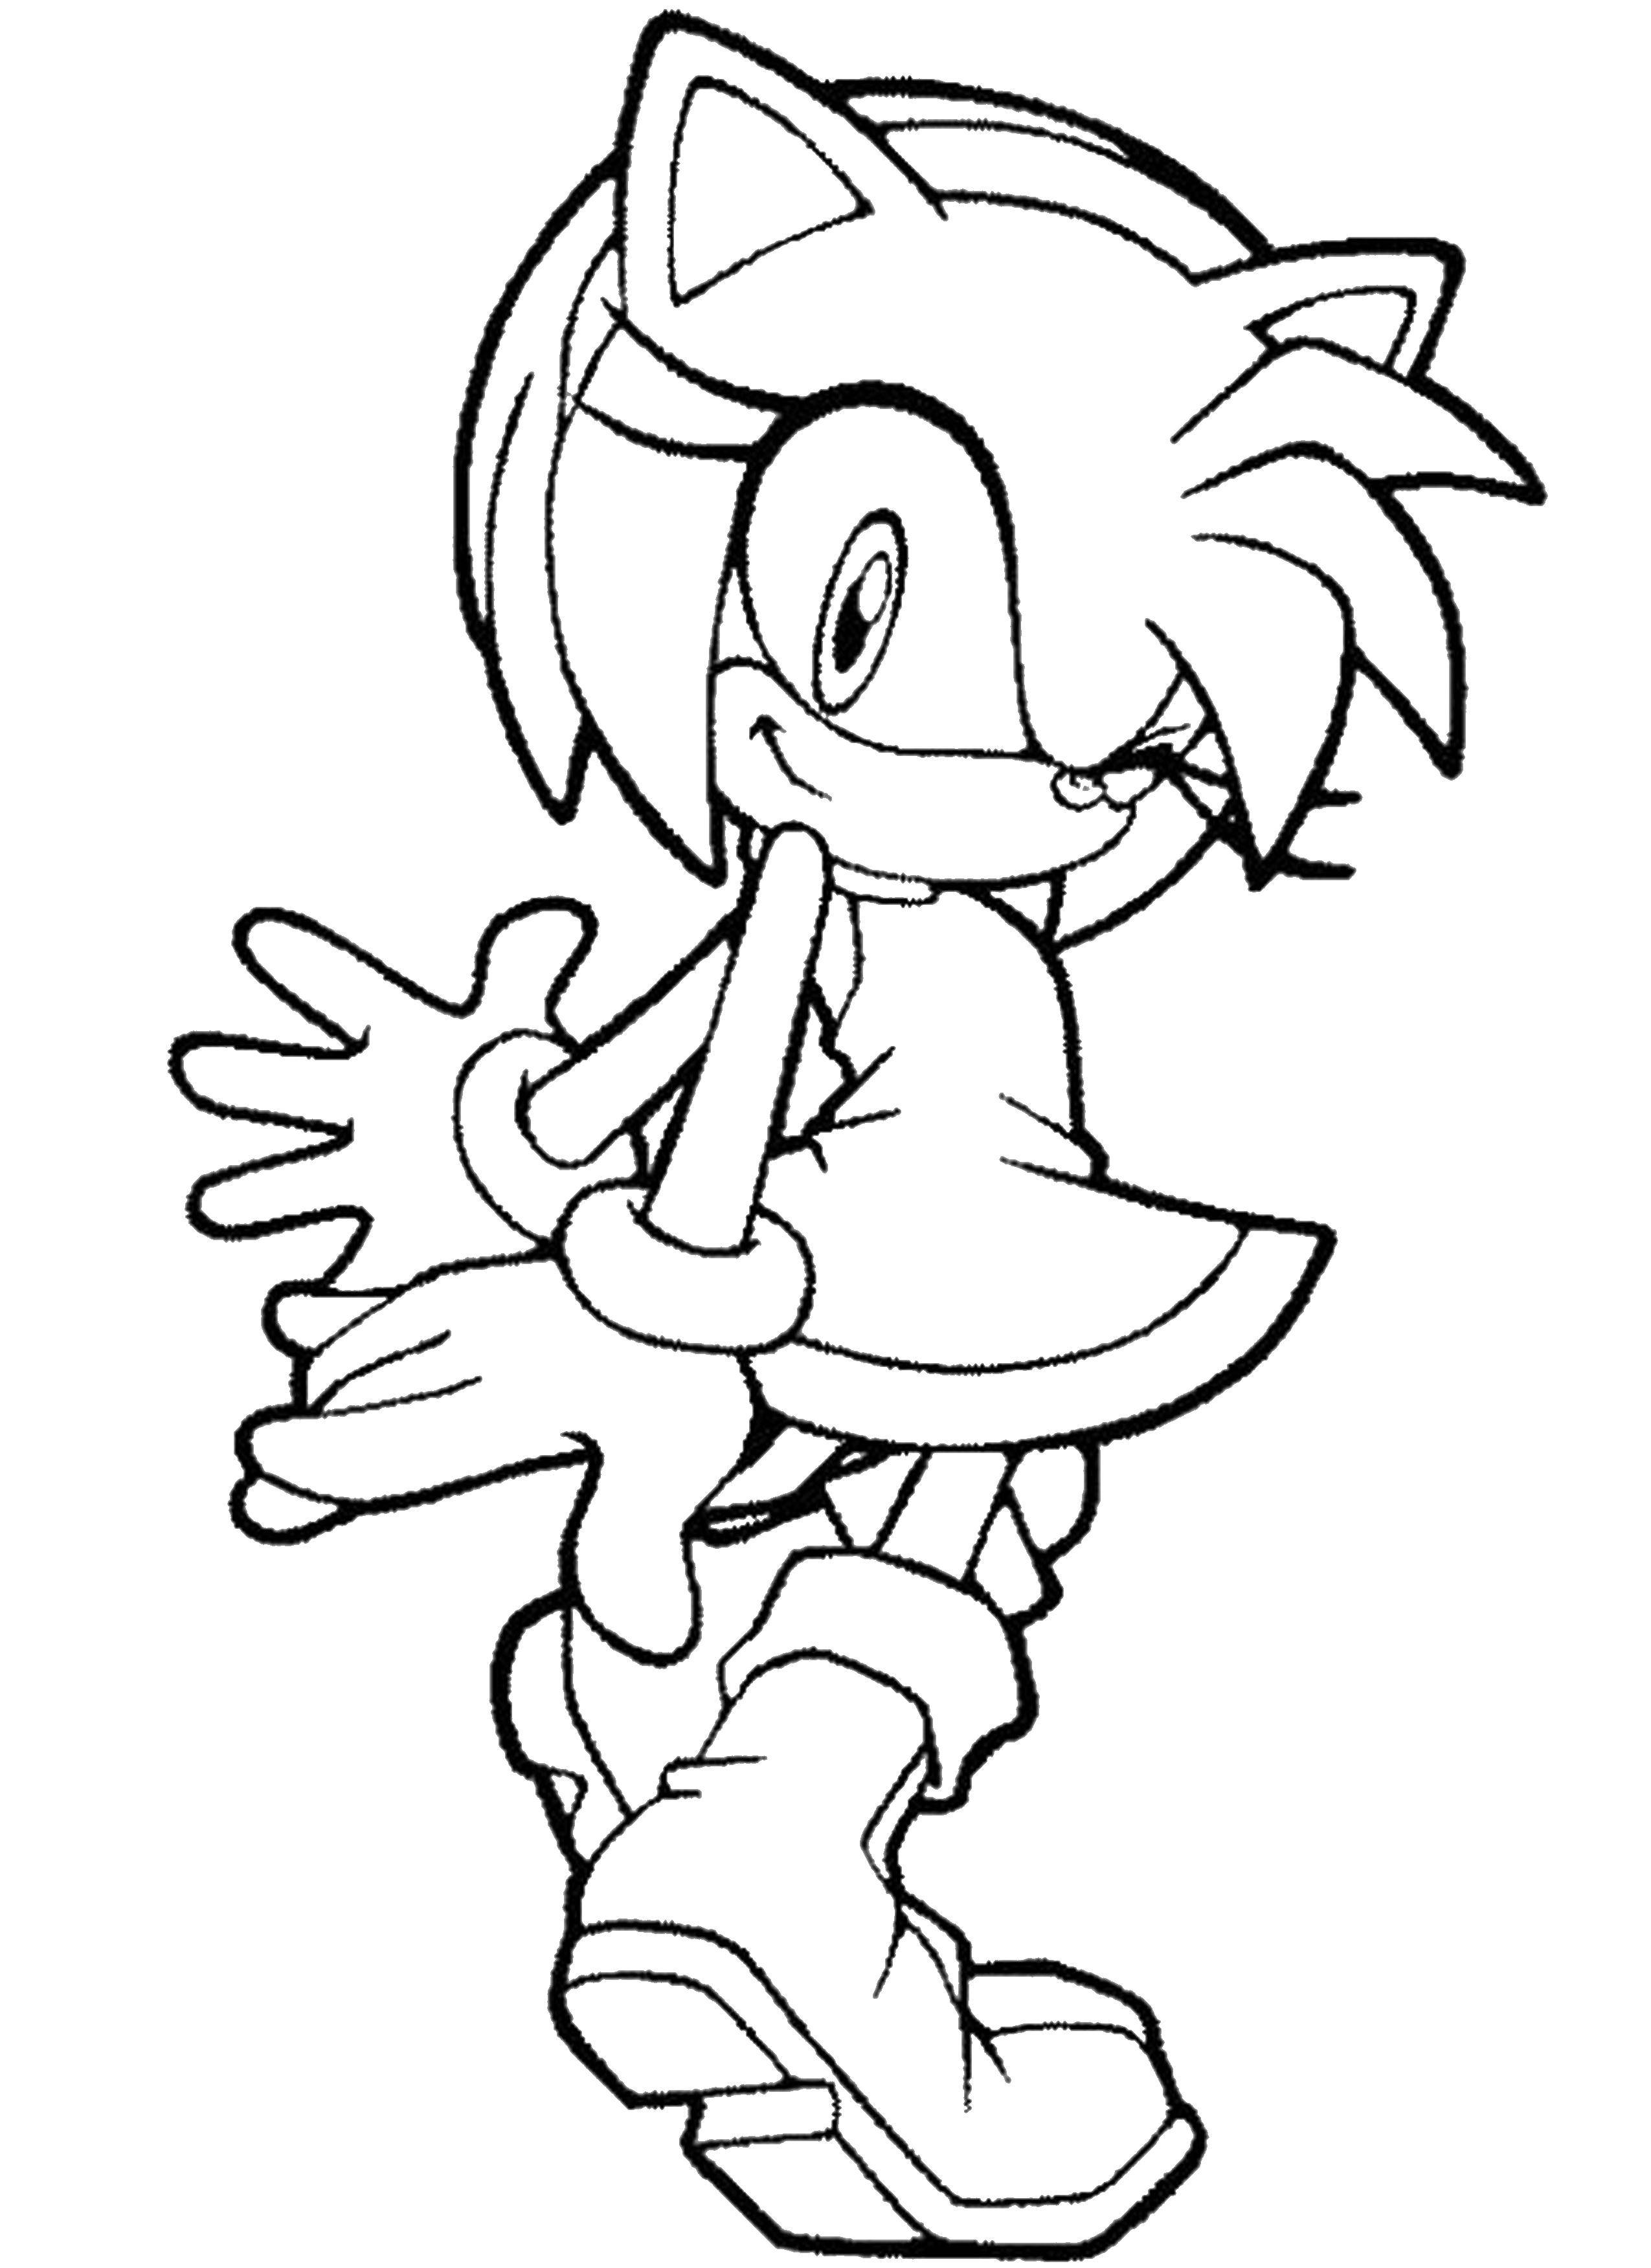 Coloring Friend of sonic, Amy. Category cartoons. Tags:  Amy, Sonic.